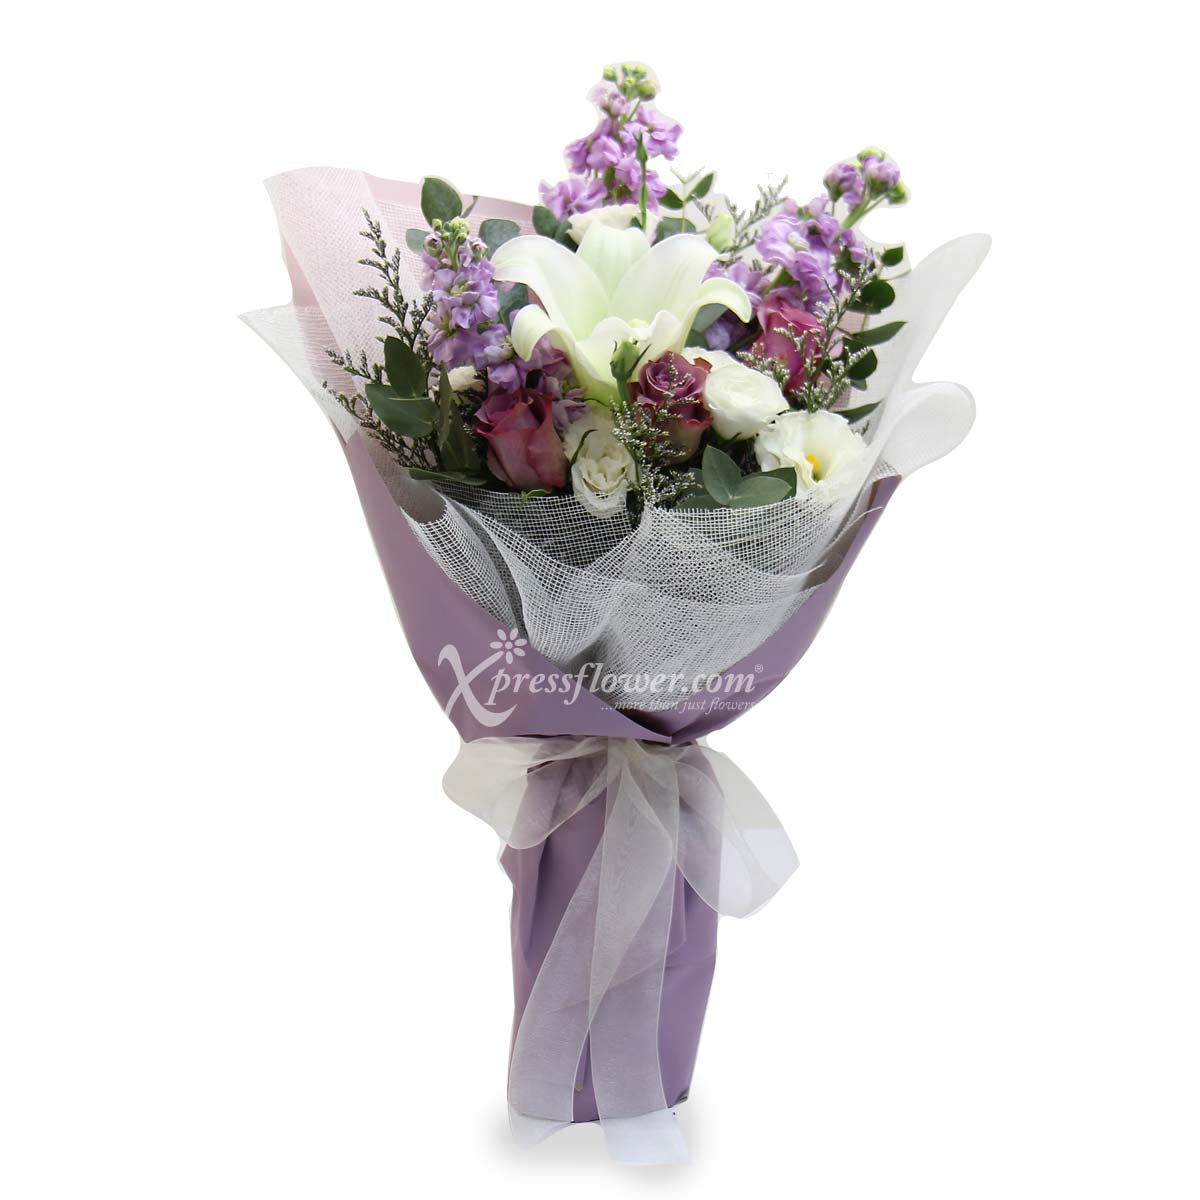 Violet Romance (1 White Lily & 3 Yam Roses)